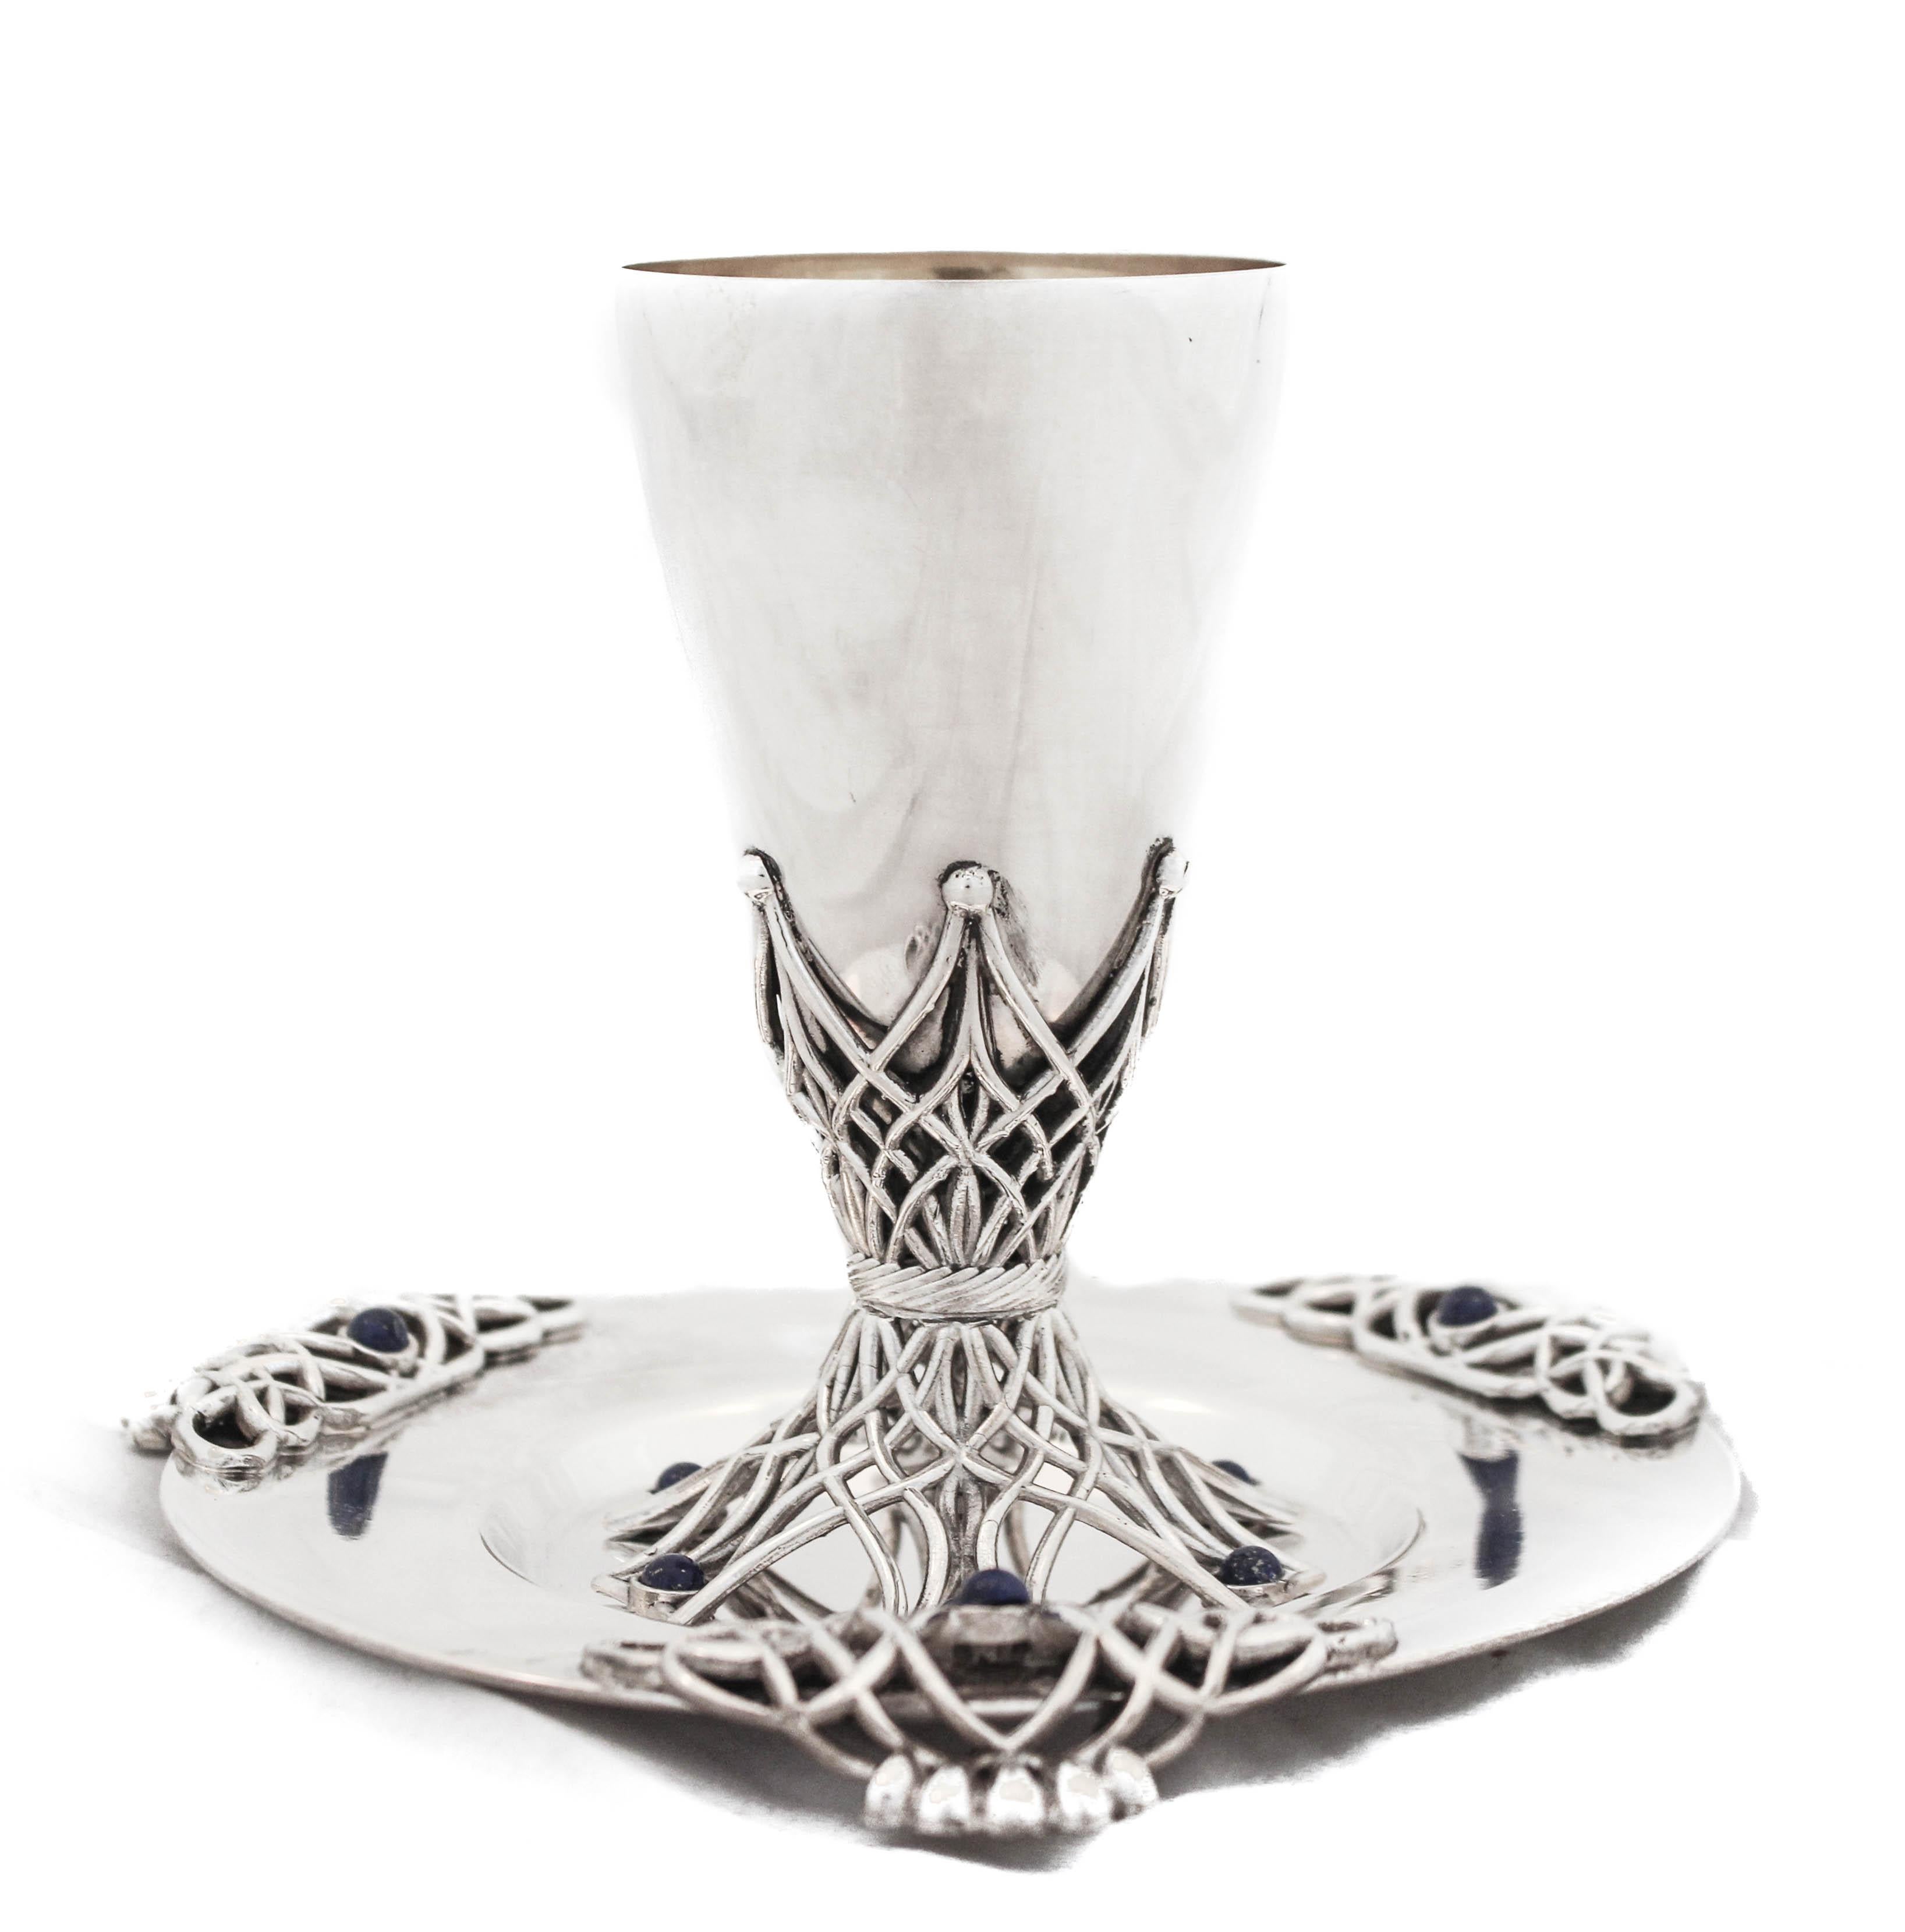 This sterling silver goblet and plate are made in Israel. They have Lapis stones in both the plate (around the edge) and cup (on the base). It’s a beautiful mix of modern and intricate cutout work. The cup and plate are like jewels waiting to